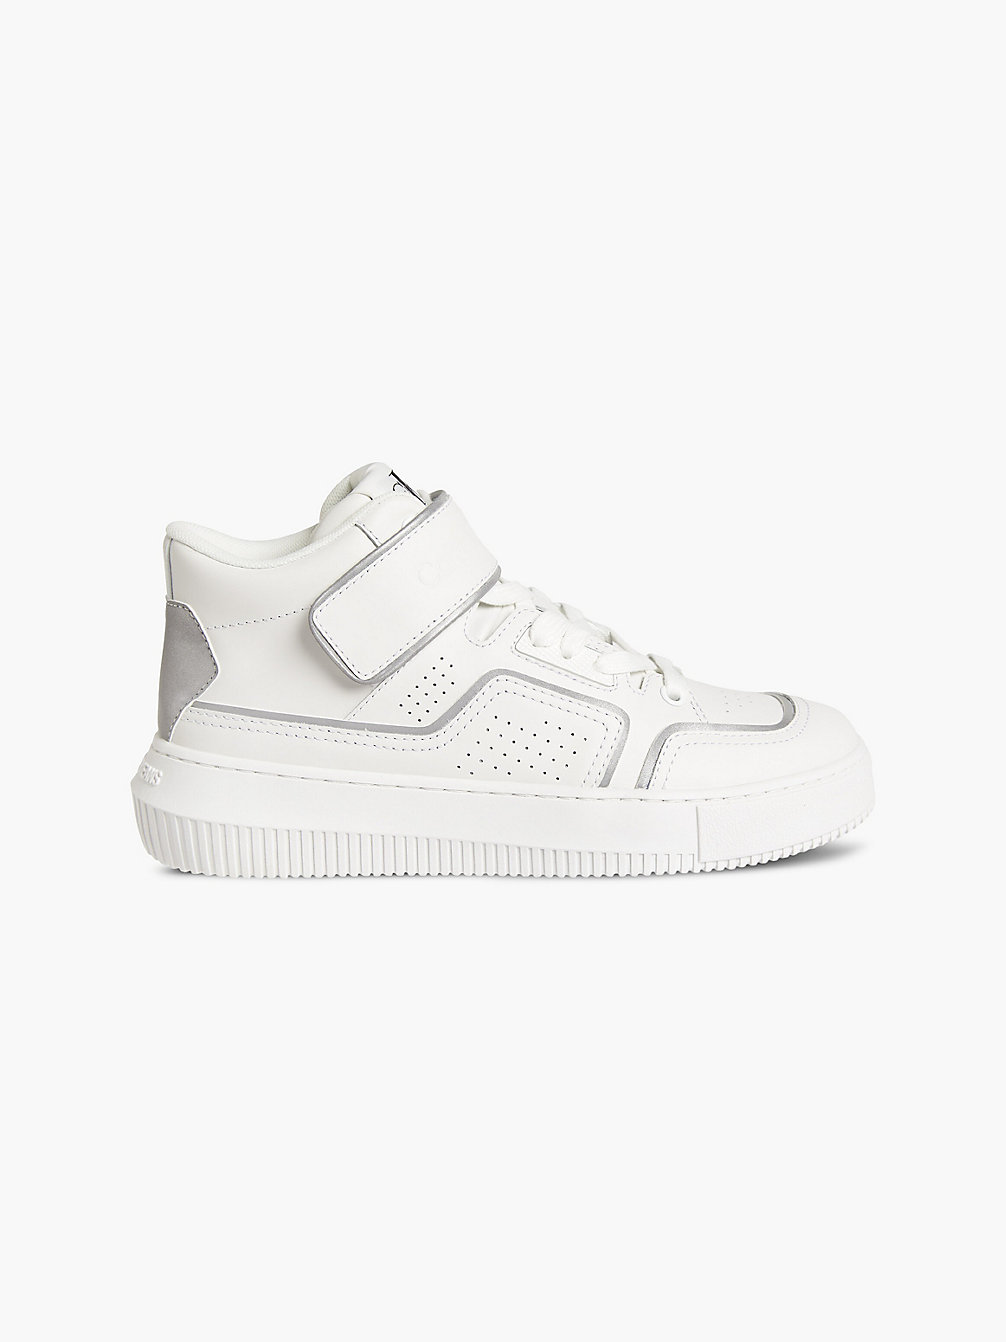 WHITE/SILVER Leather High-Top Trainers undefined women Calvin Klein